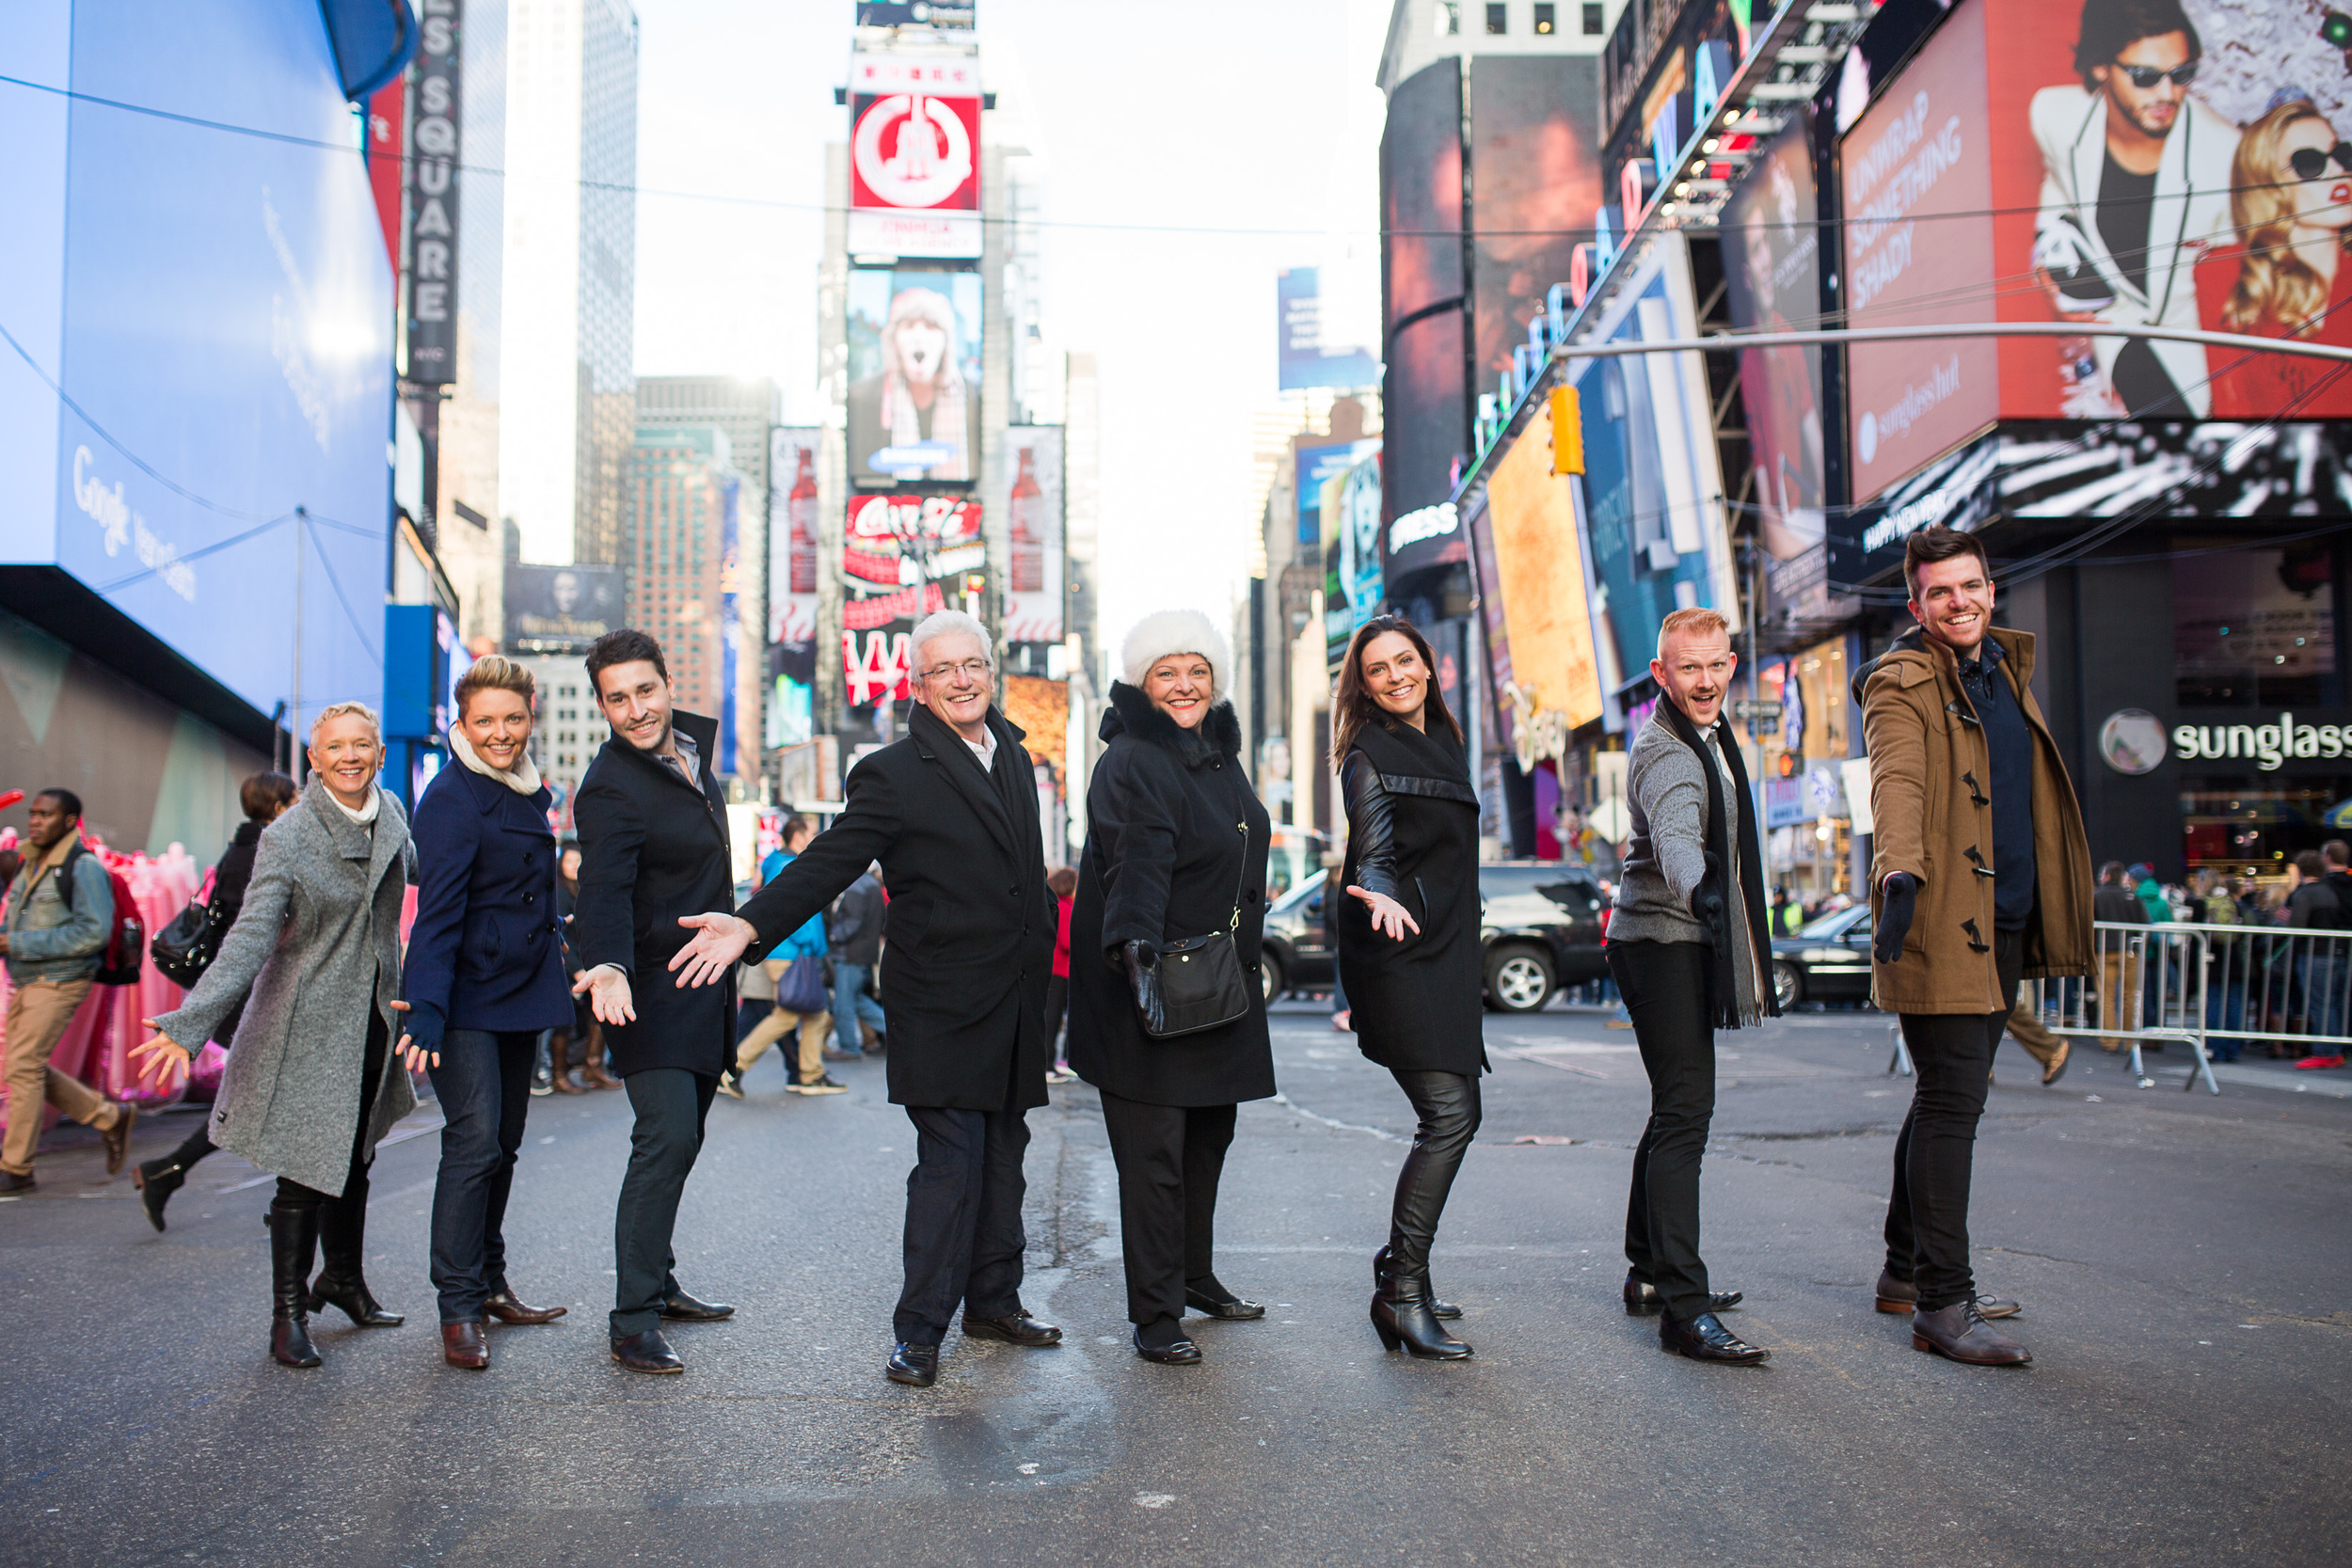  The Donnelly Family is well-rehearsed in the Art of the Broadway show pose! 